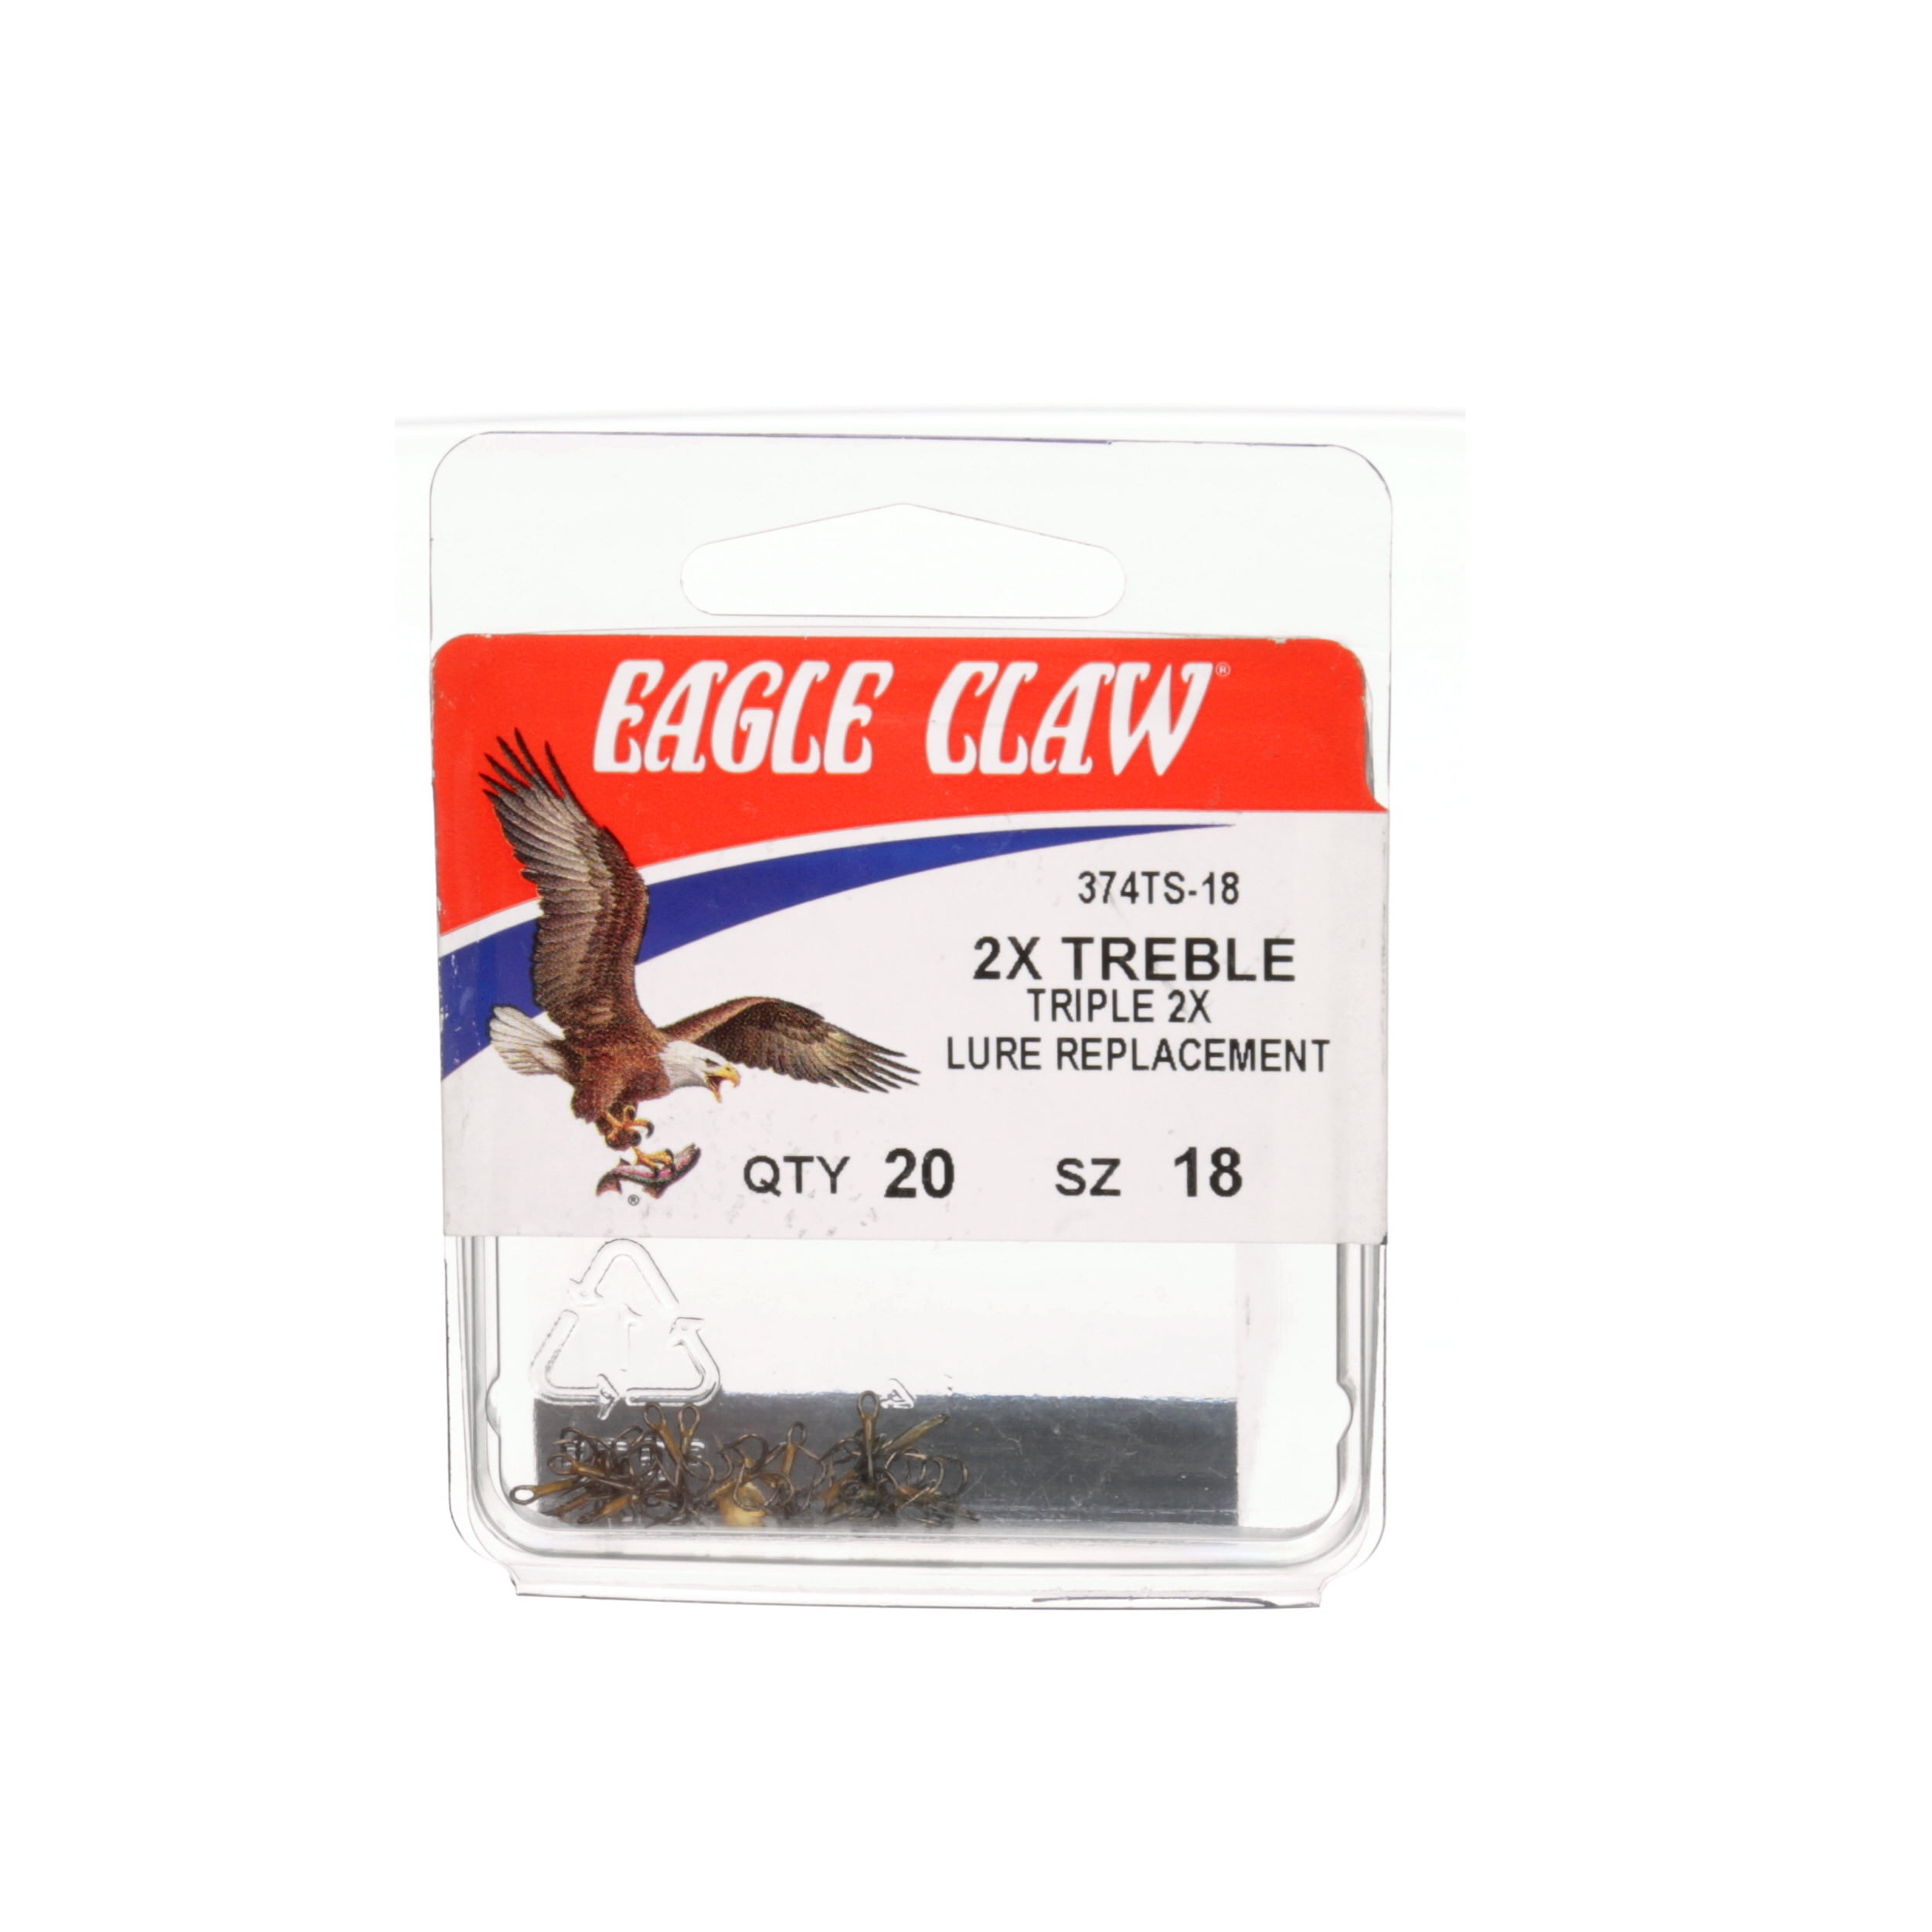 Eagle Claw 2X Treble Regular Shank Curved Point Fishing Hooks, Bronze, Size  4, 20 Pack 